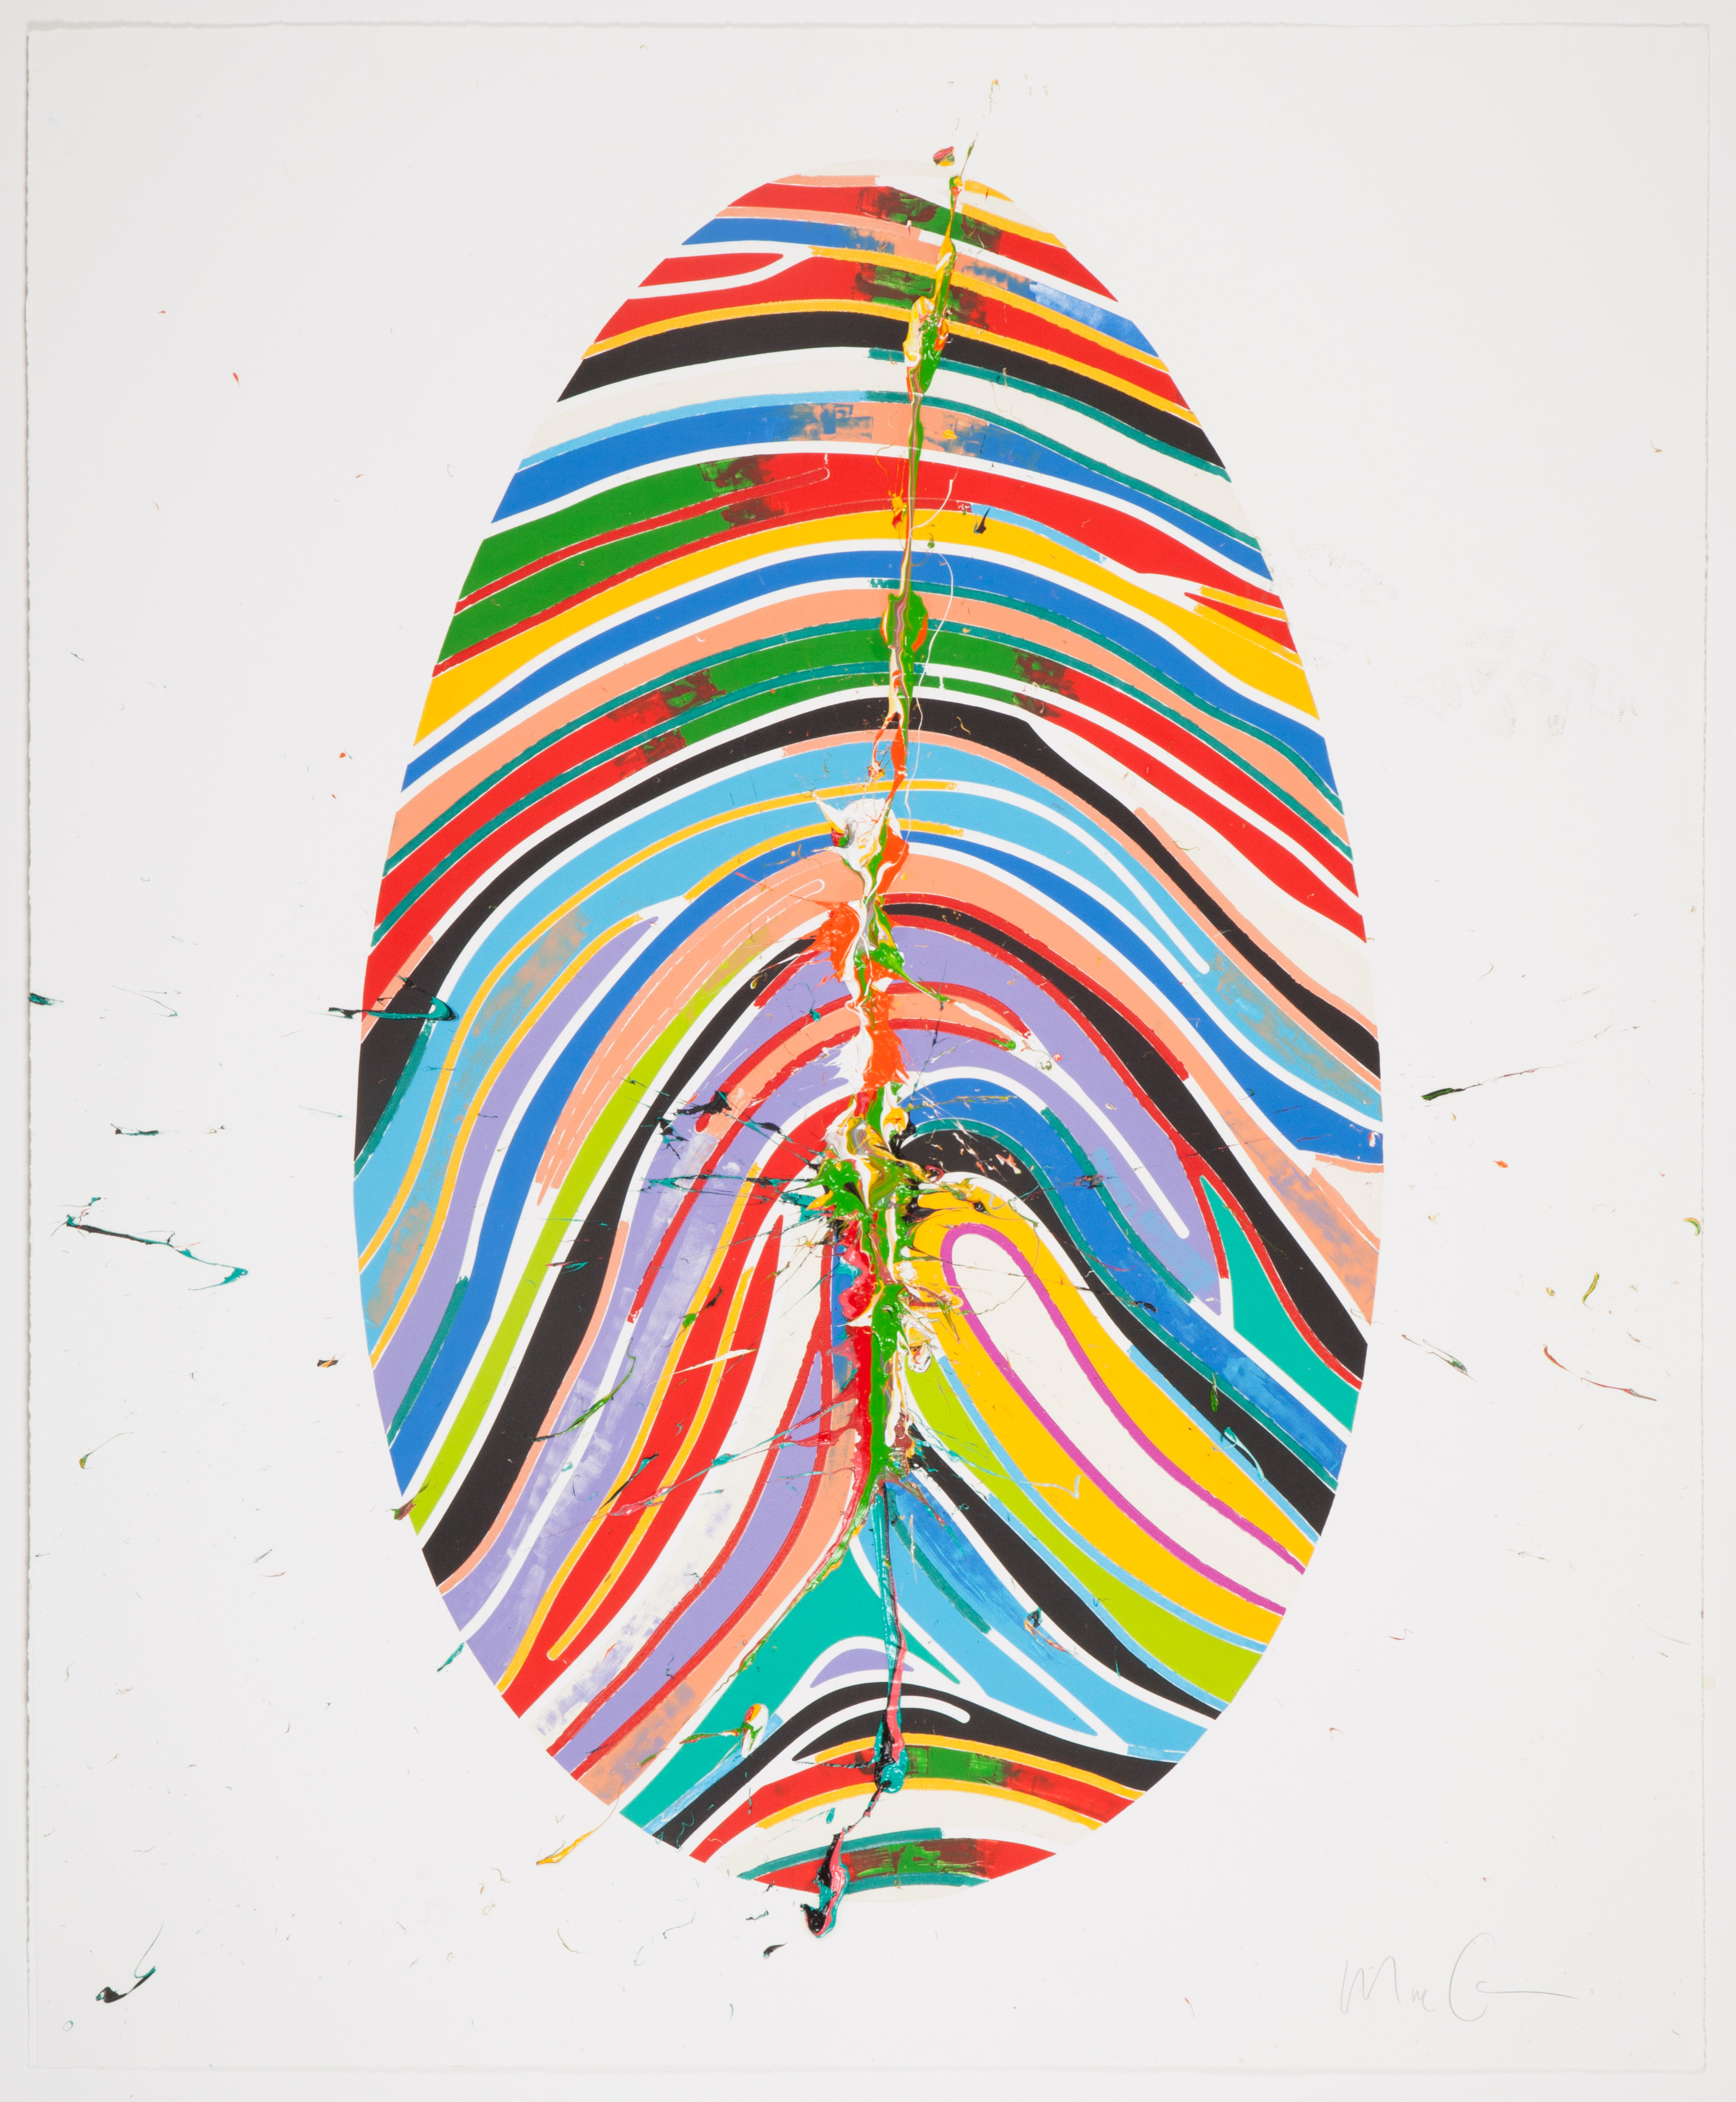 Marc Quinn’s ‘Urban Nomad’ Desert Boot goes on sale to benefit The Halo Trust picture